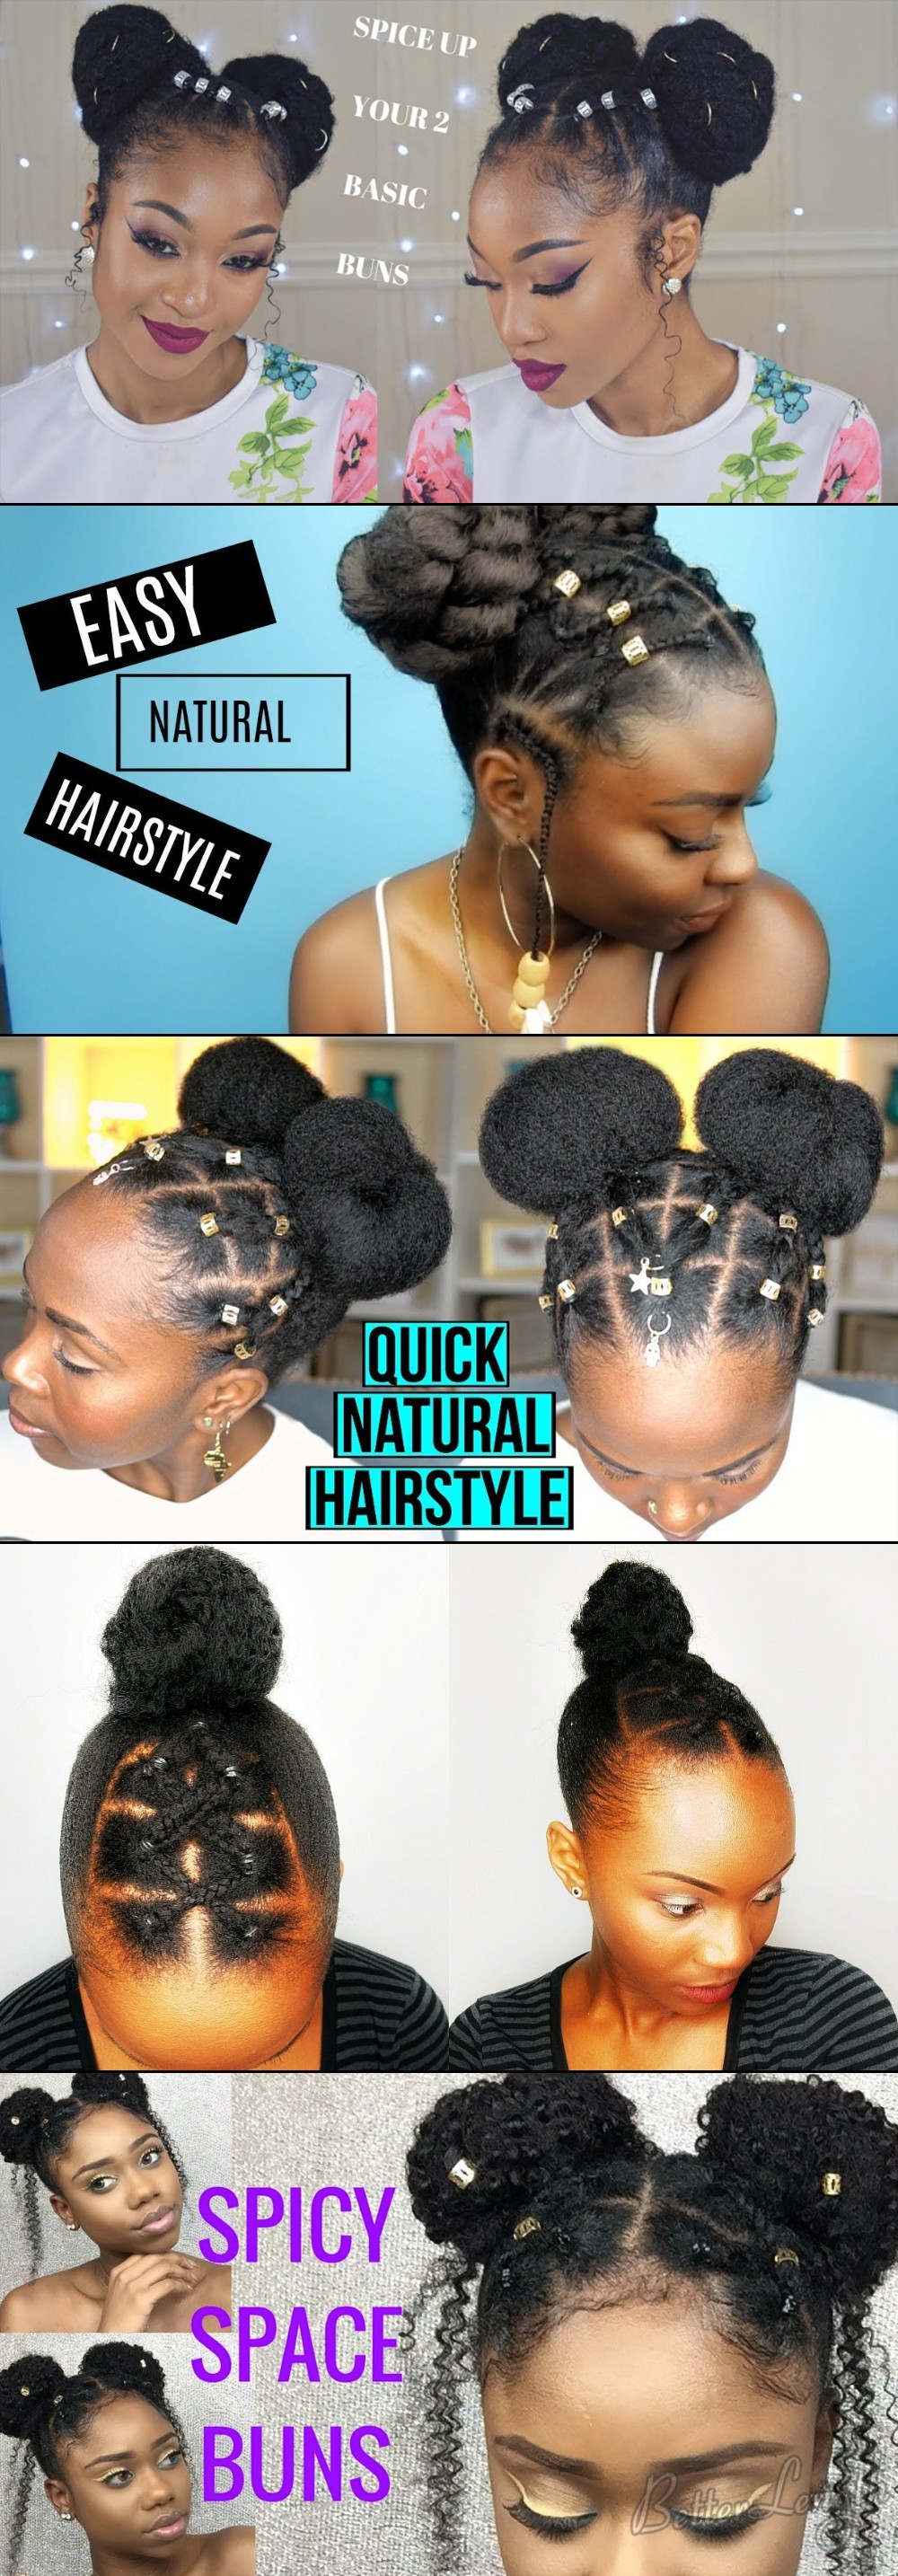 spiceupregularbuns - 5 Trendy Summer Natural Hairstyles You Must Be Try Using Your Textured Clip Ins